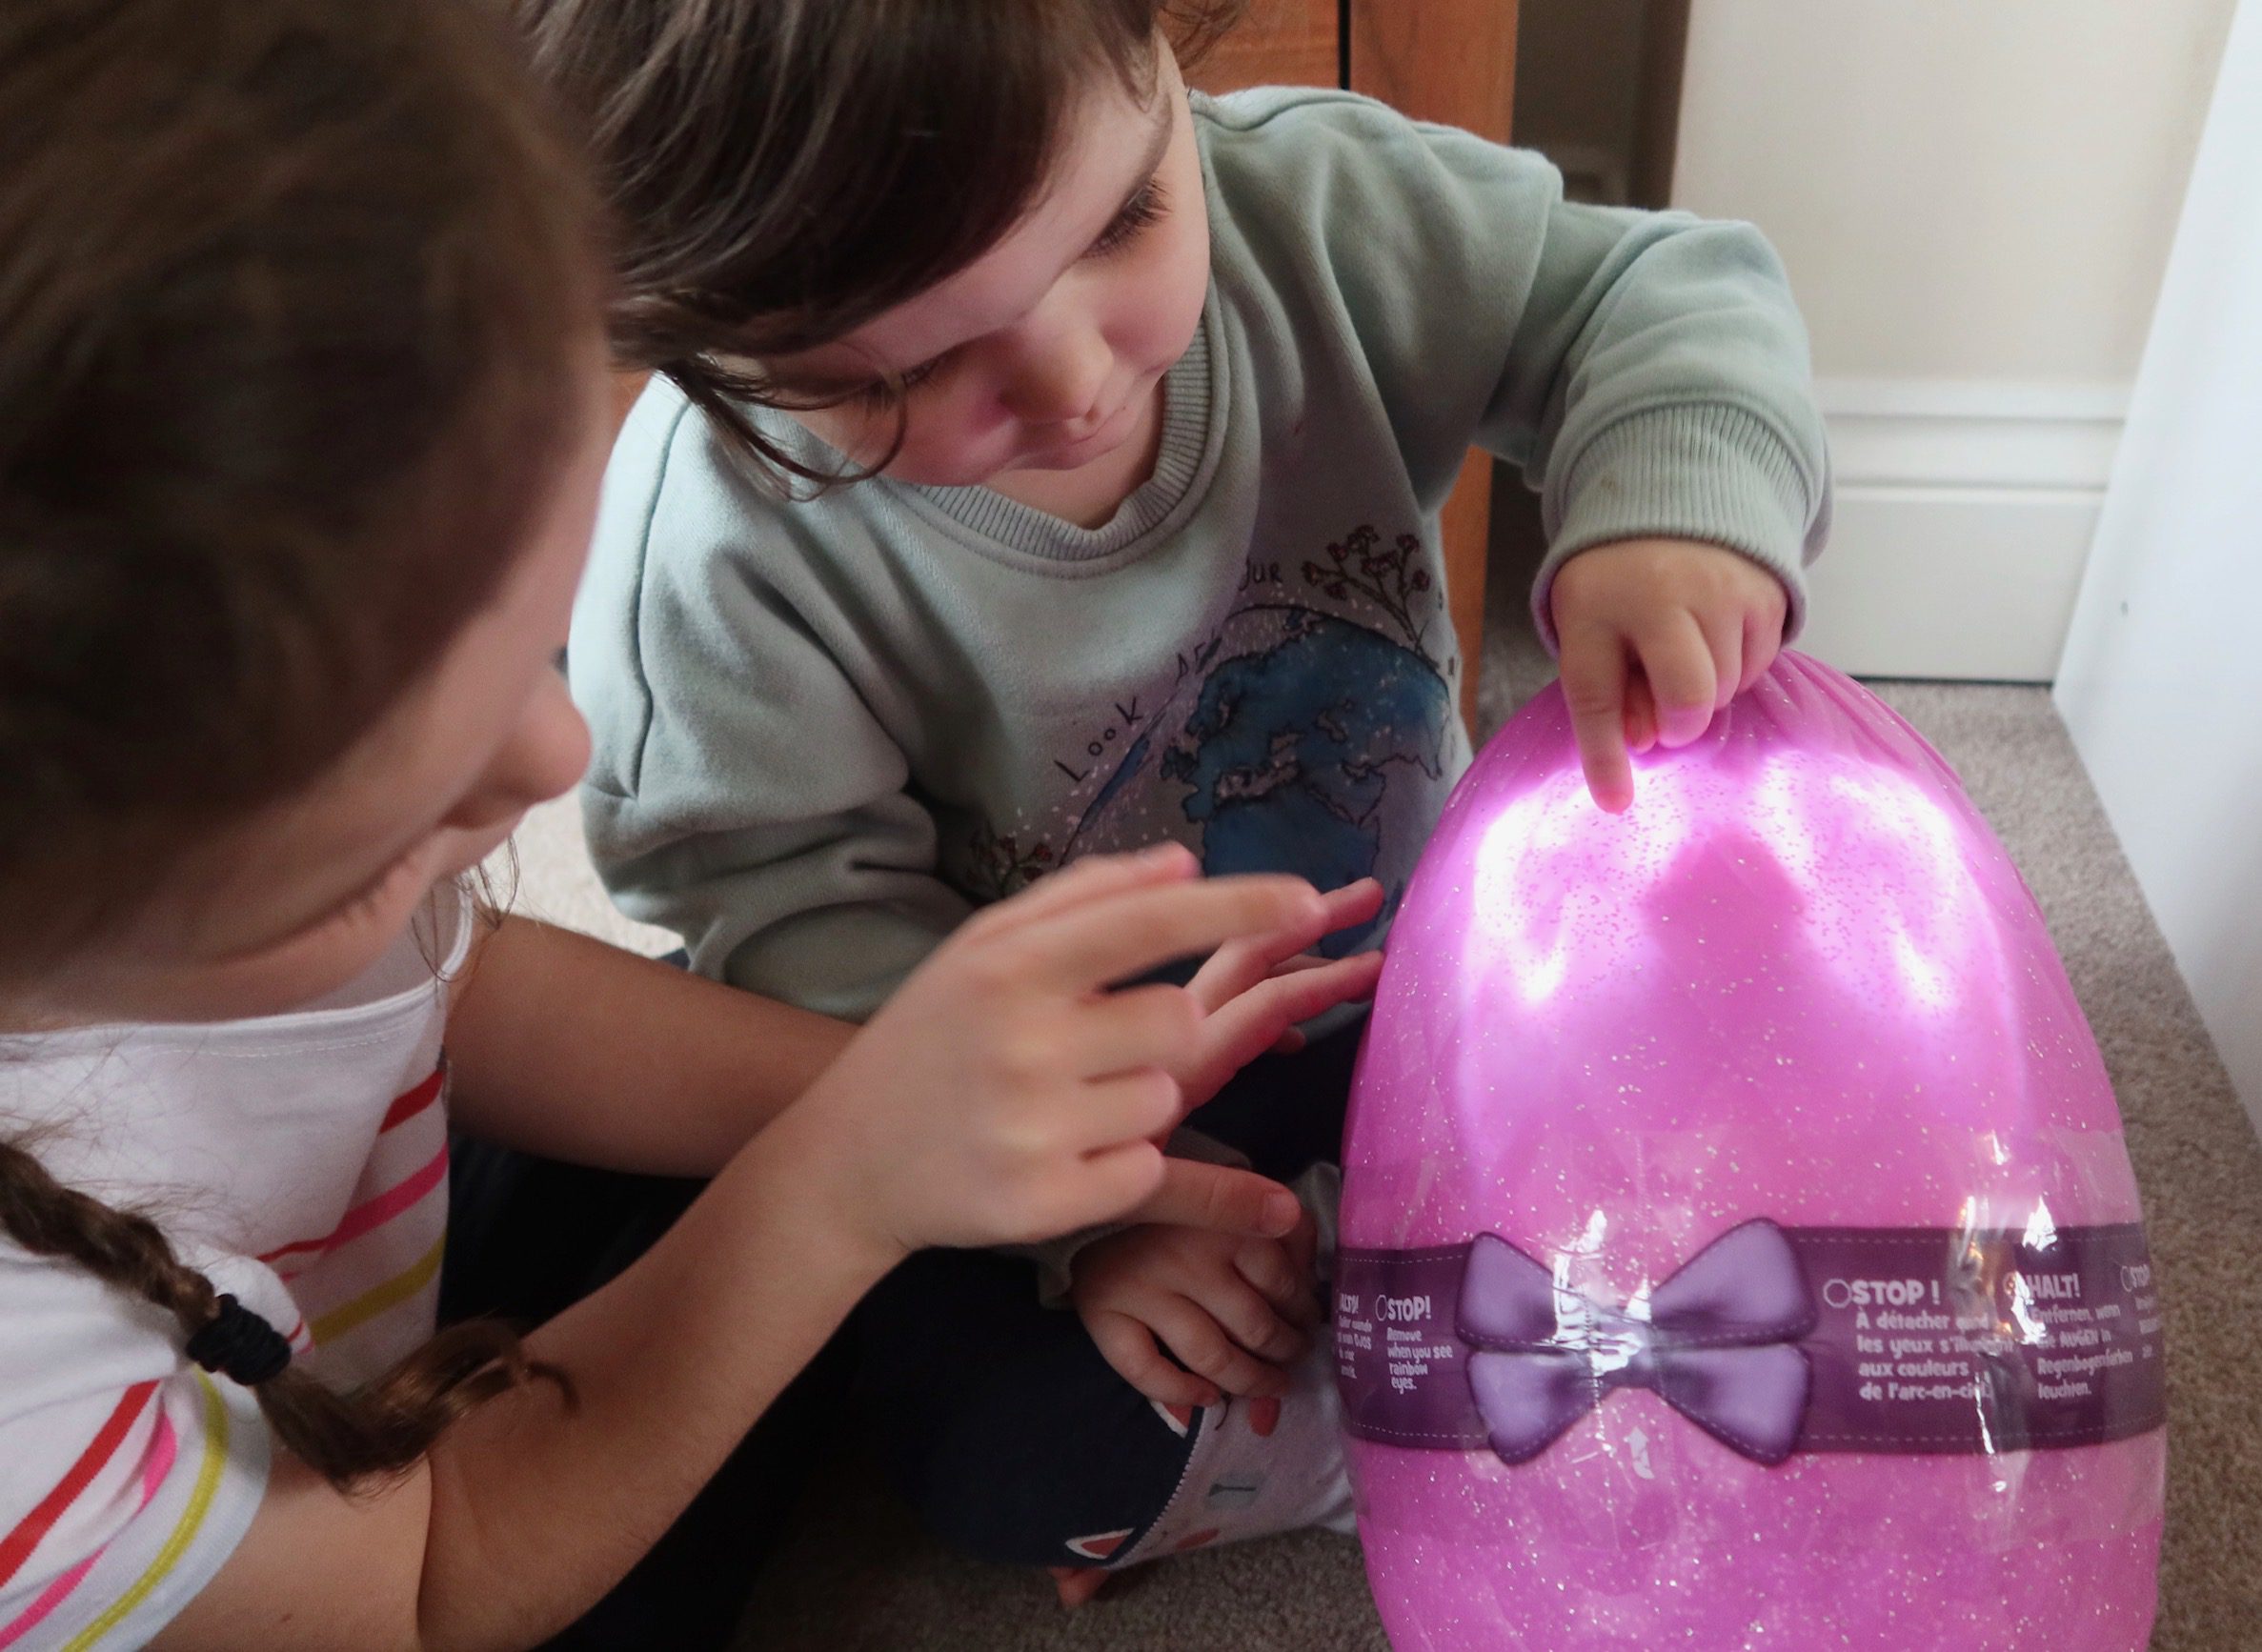 Hatchimals WOW Review - How The Hatchimals WOW Works